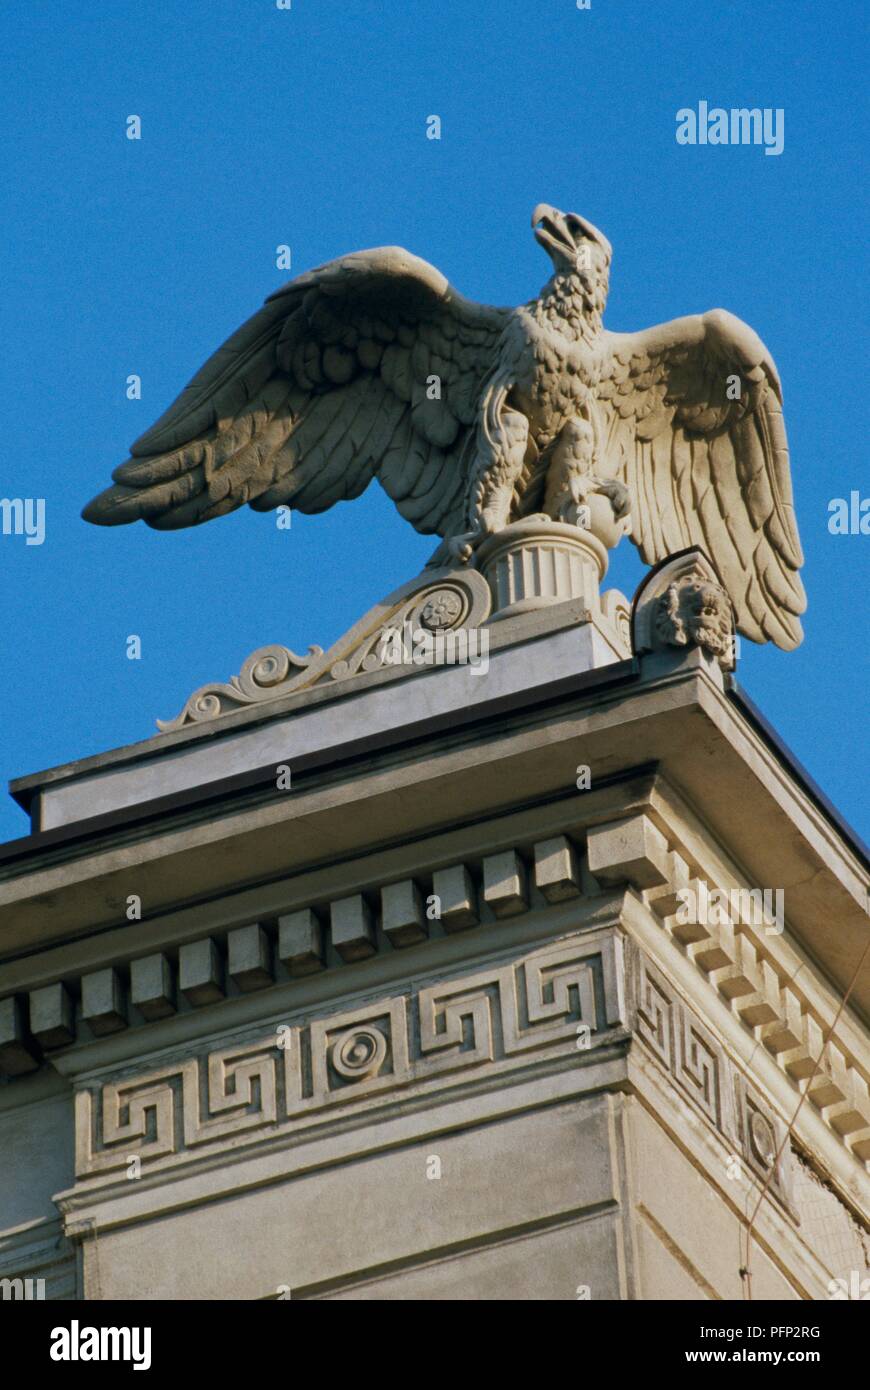 Germany, Berlin, carved stone eagle adorning the Altes Palais, a Neo-Classical palace built between 1834 and 1837 for the future Kaiser Wilhelm I, reconstructed after World War II Stock Photo